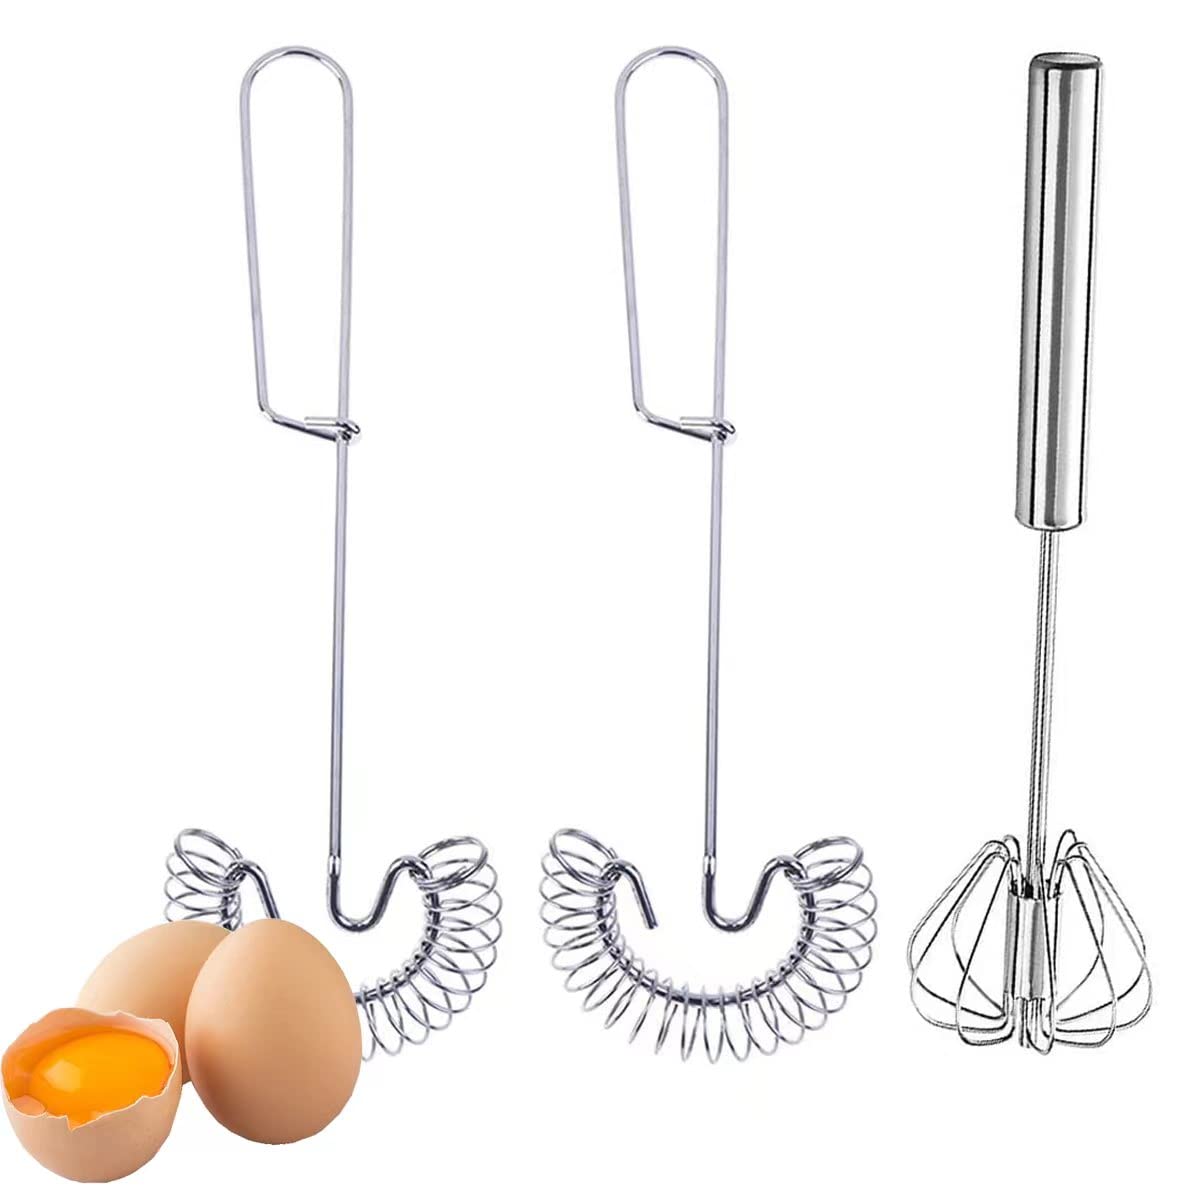 KuuGuu 3 Pieces Scandinavian-Type Whisk Egg Small Whisk Whipper Stainless Steel Egg Whisk Flat Spring coil Whisk Egg Frother, Milk and